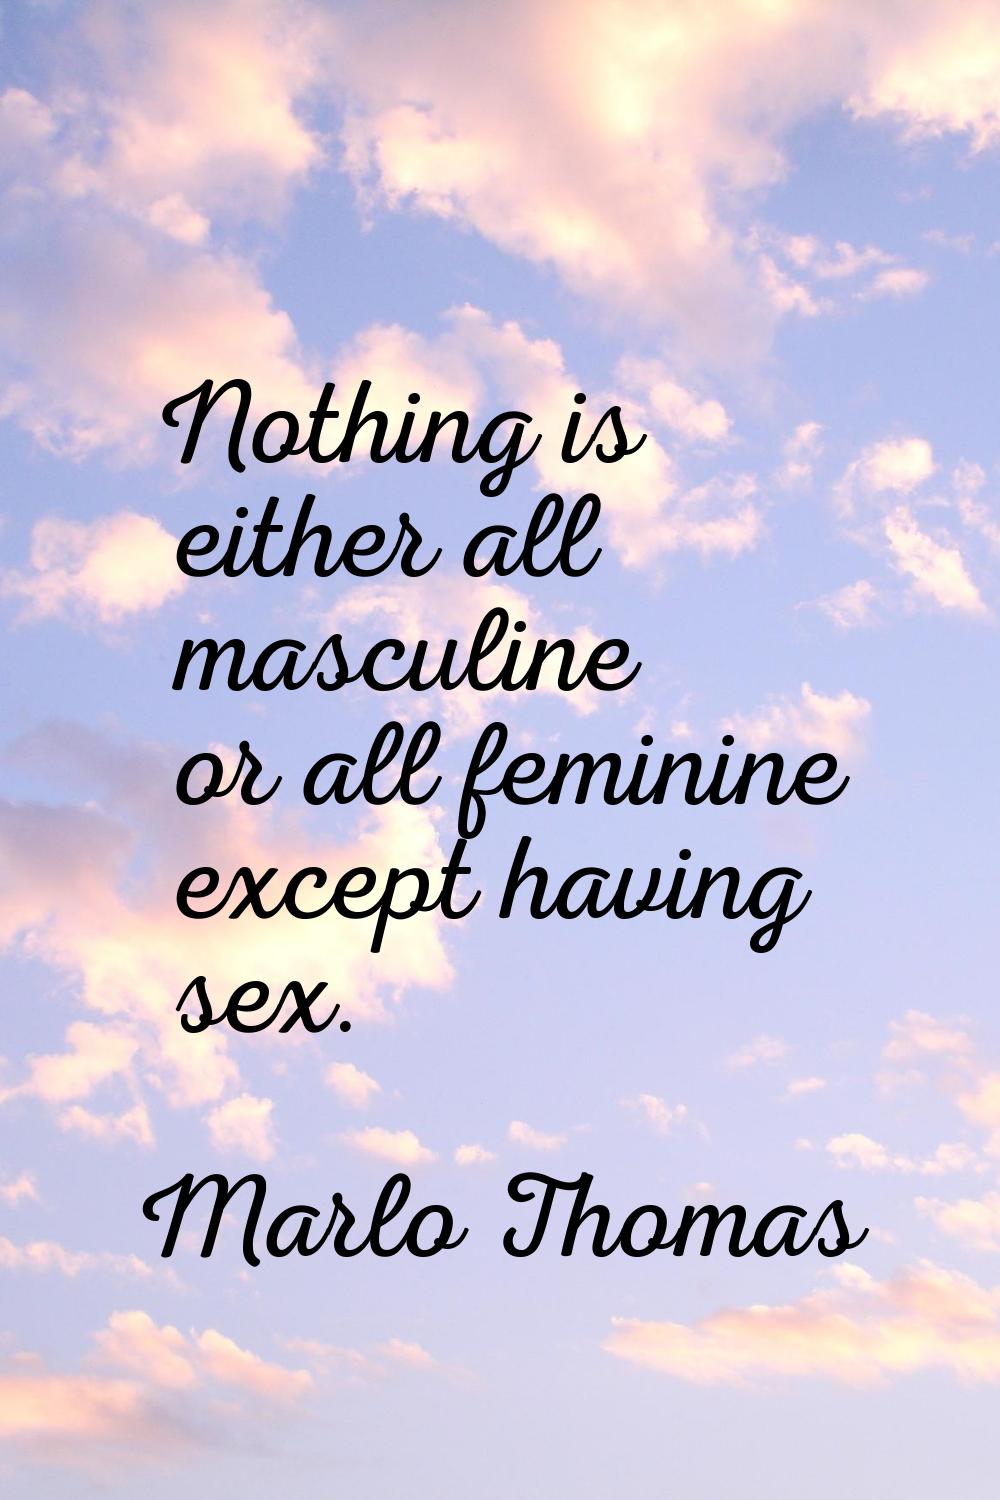 Nothing is either all masculine or all feminine except having sex.